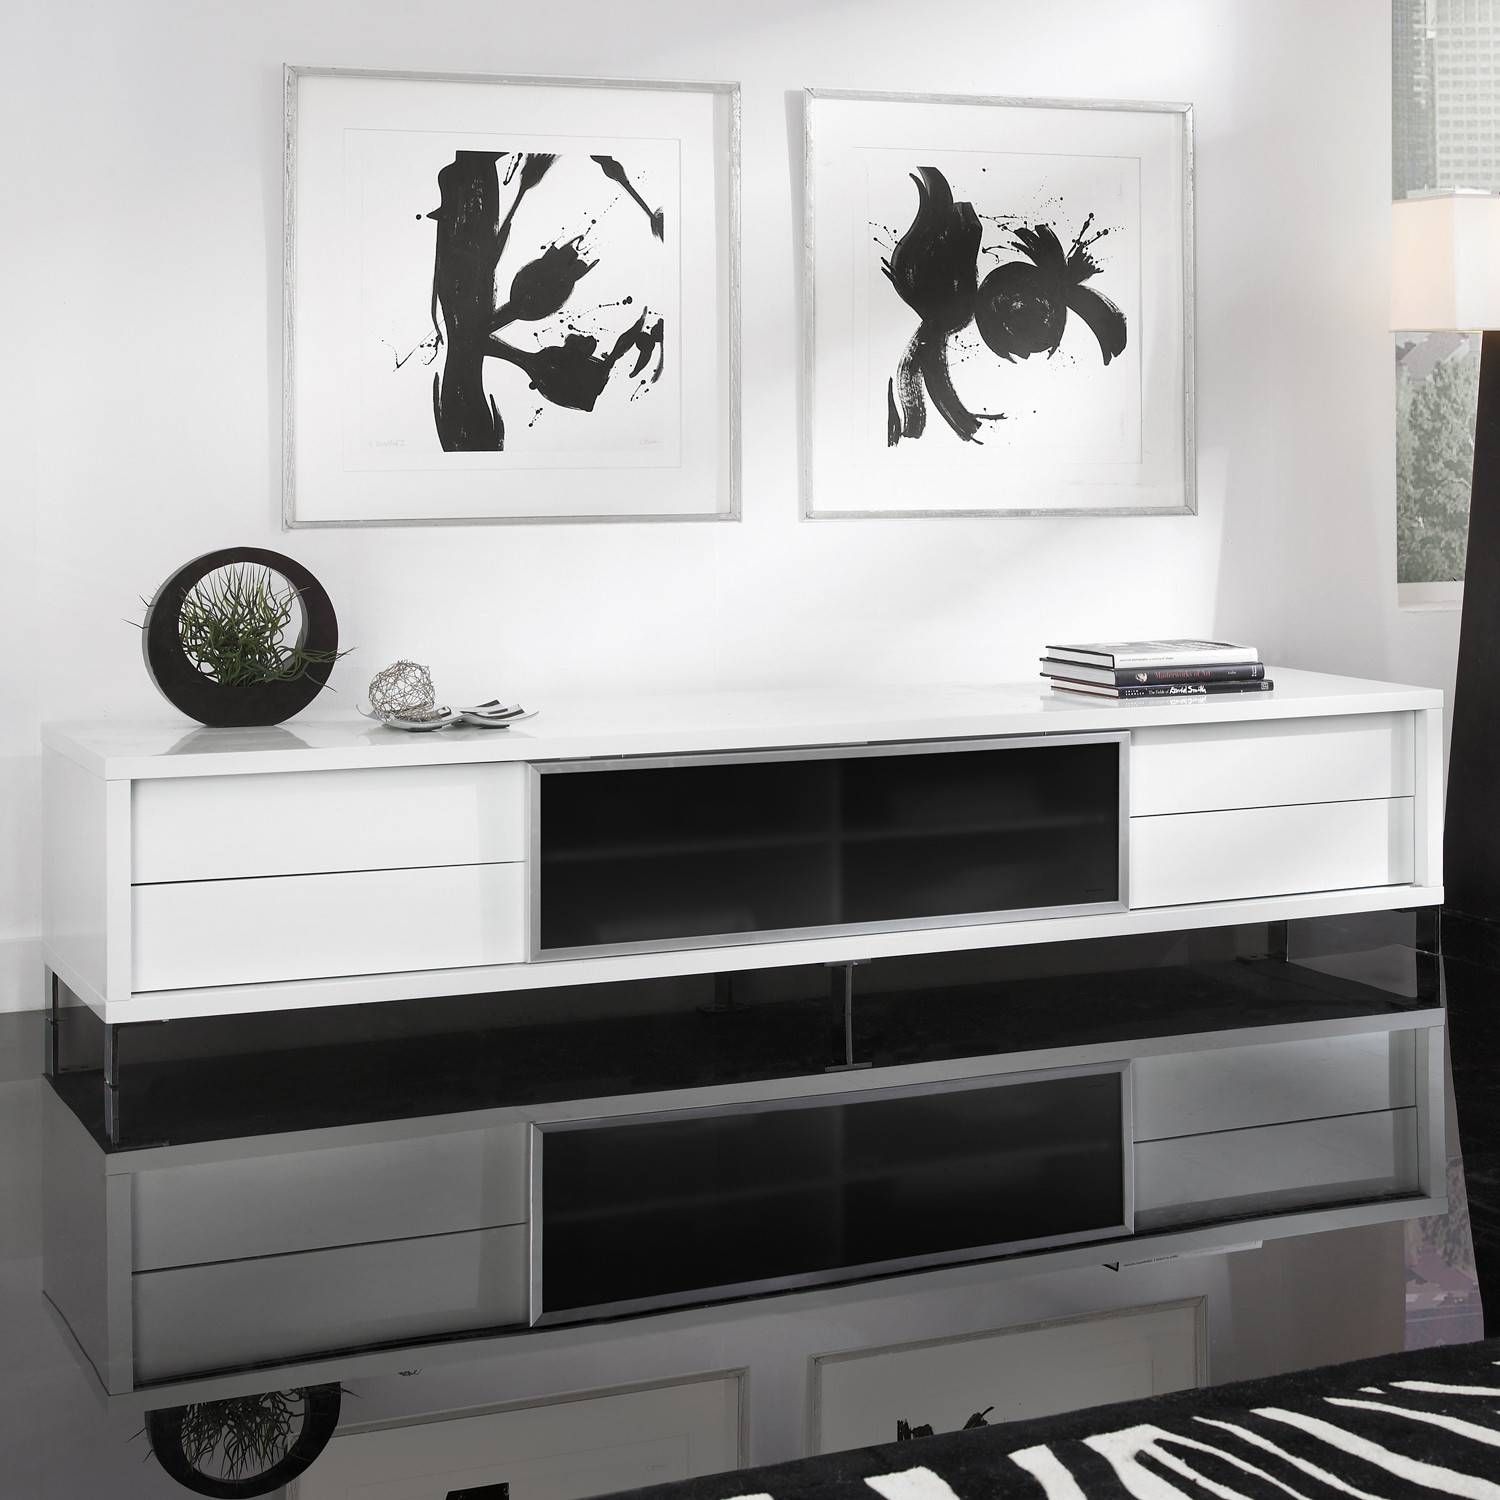 Lovely Black Lacquer Tv Stand 53 In Modern Decoration Design With With Regard To White And Black Tv Stands (View 15 of 15)